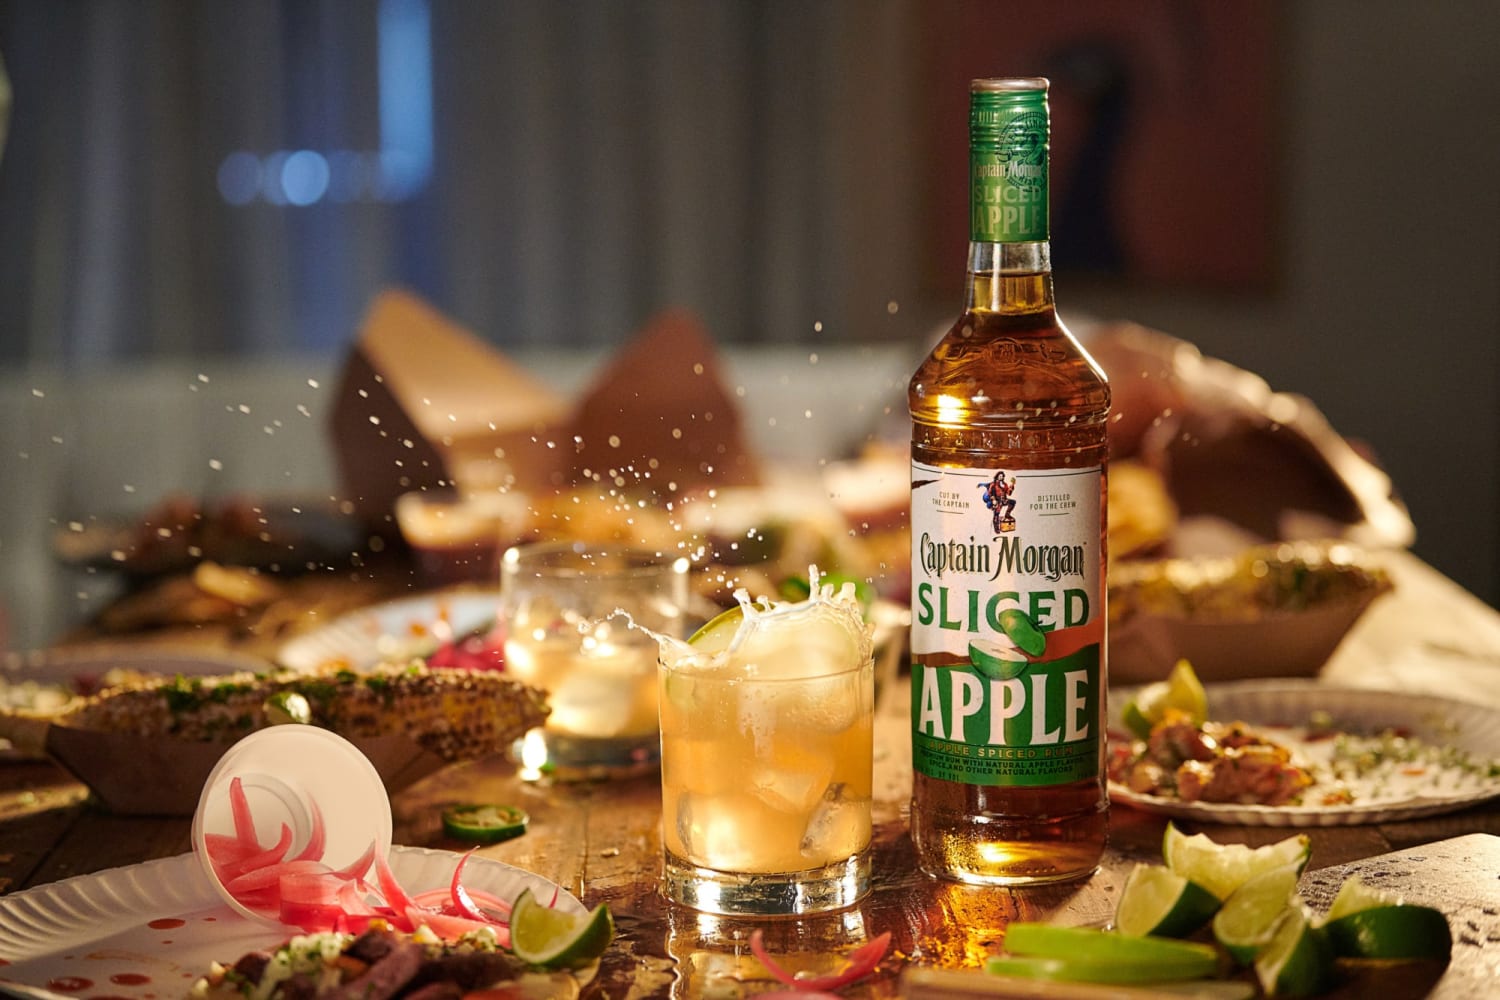 Captain Morgan Sliced Apple is the perfect pick for fall